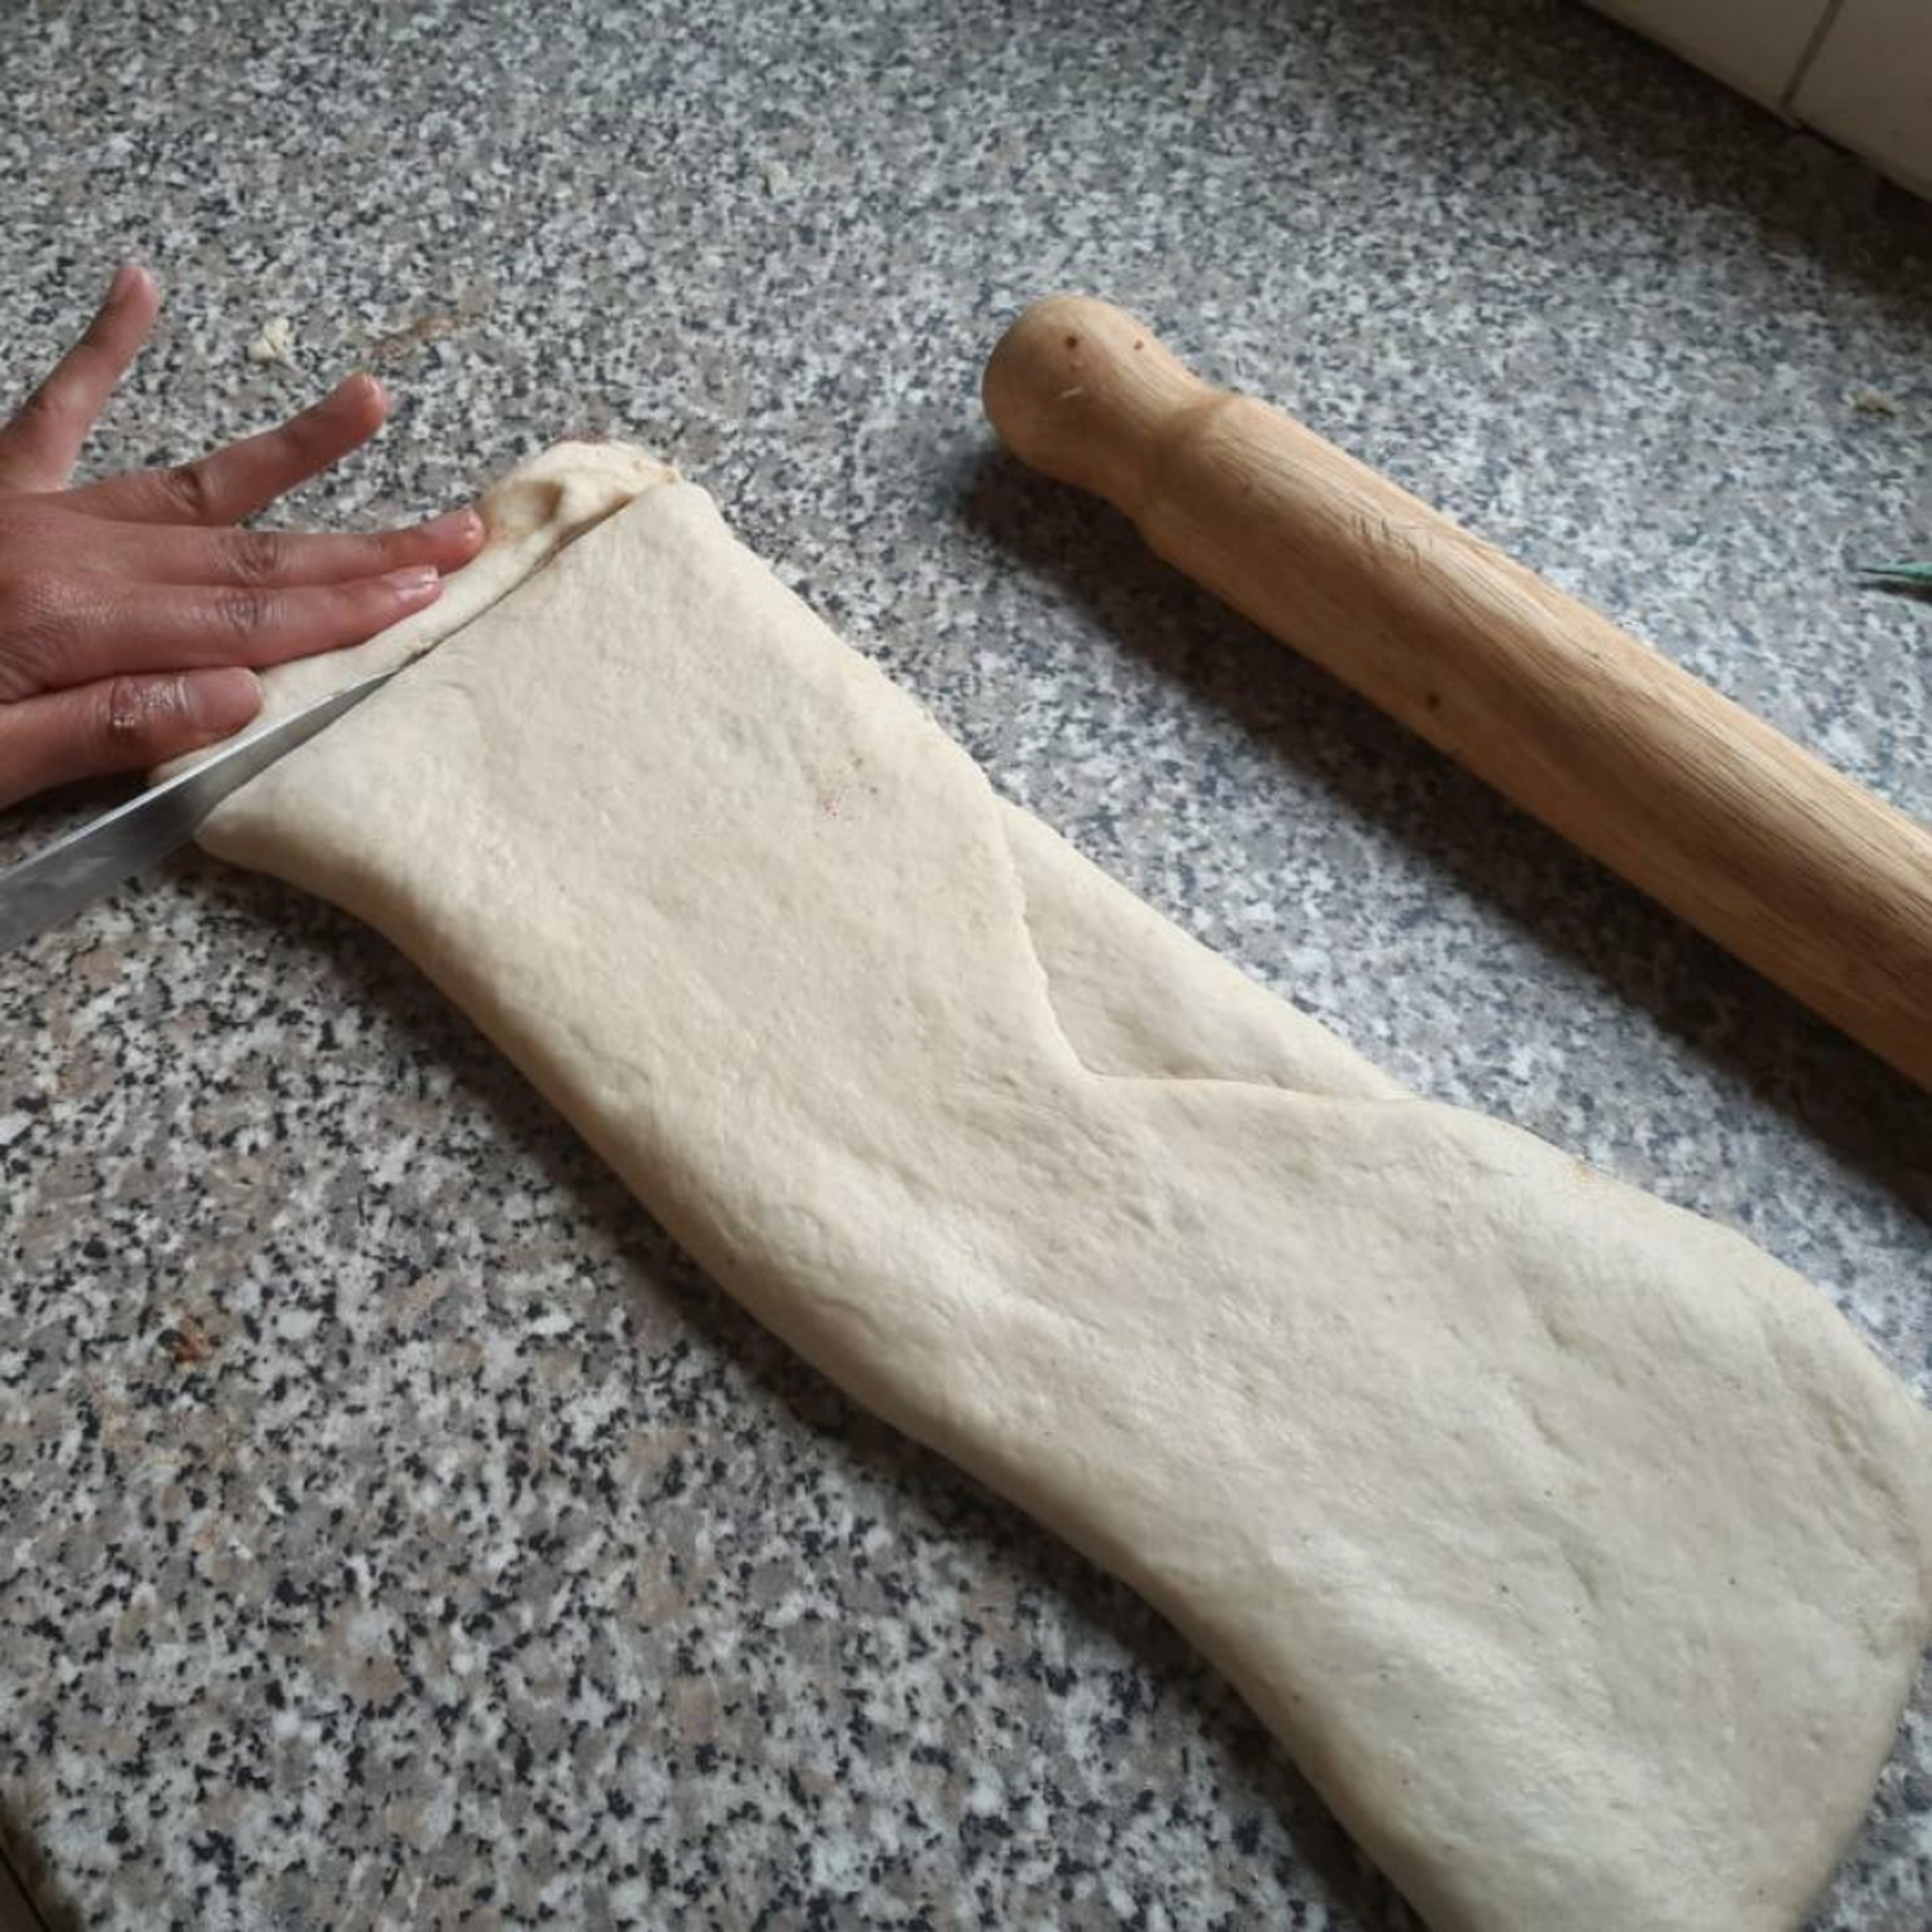 From the width of the dough, cut into strips (rough sizing: 10-15cm long and 2 cm wide)